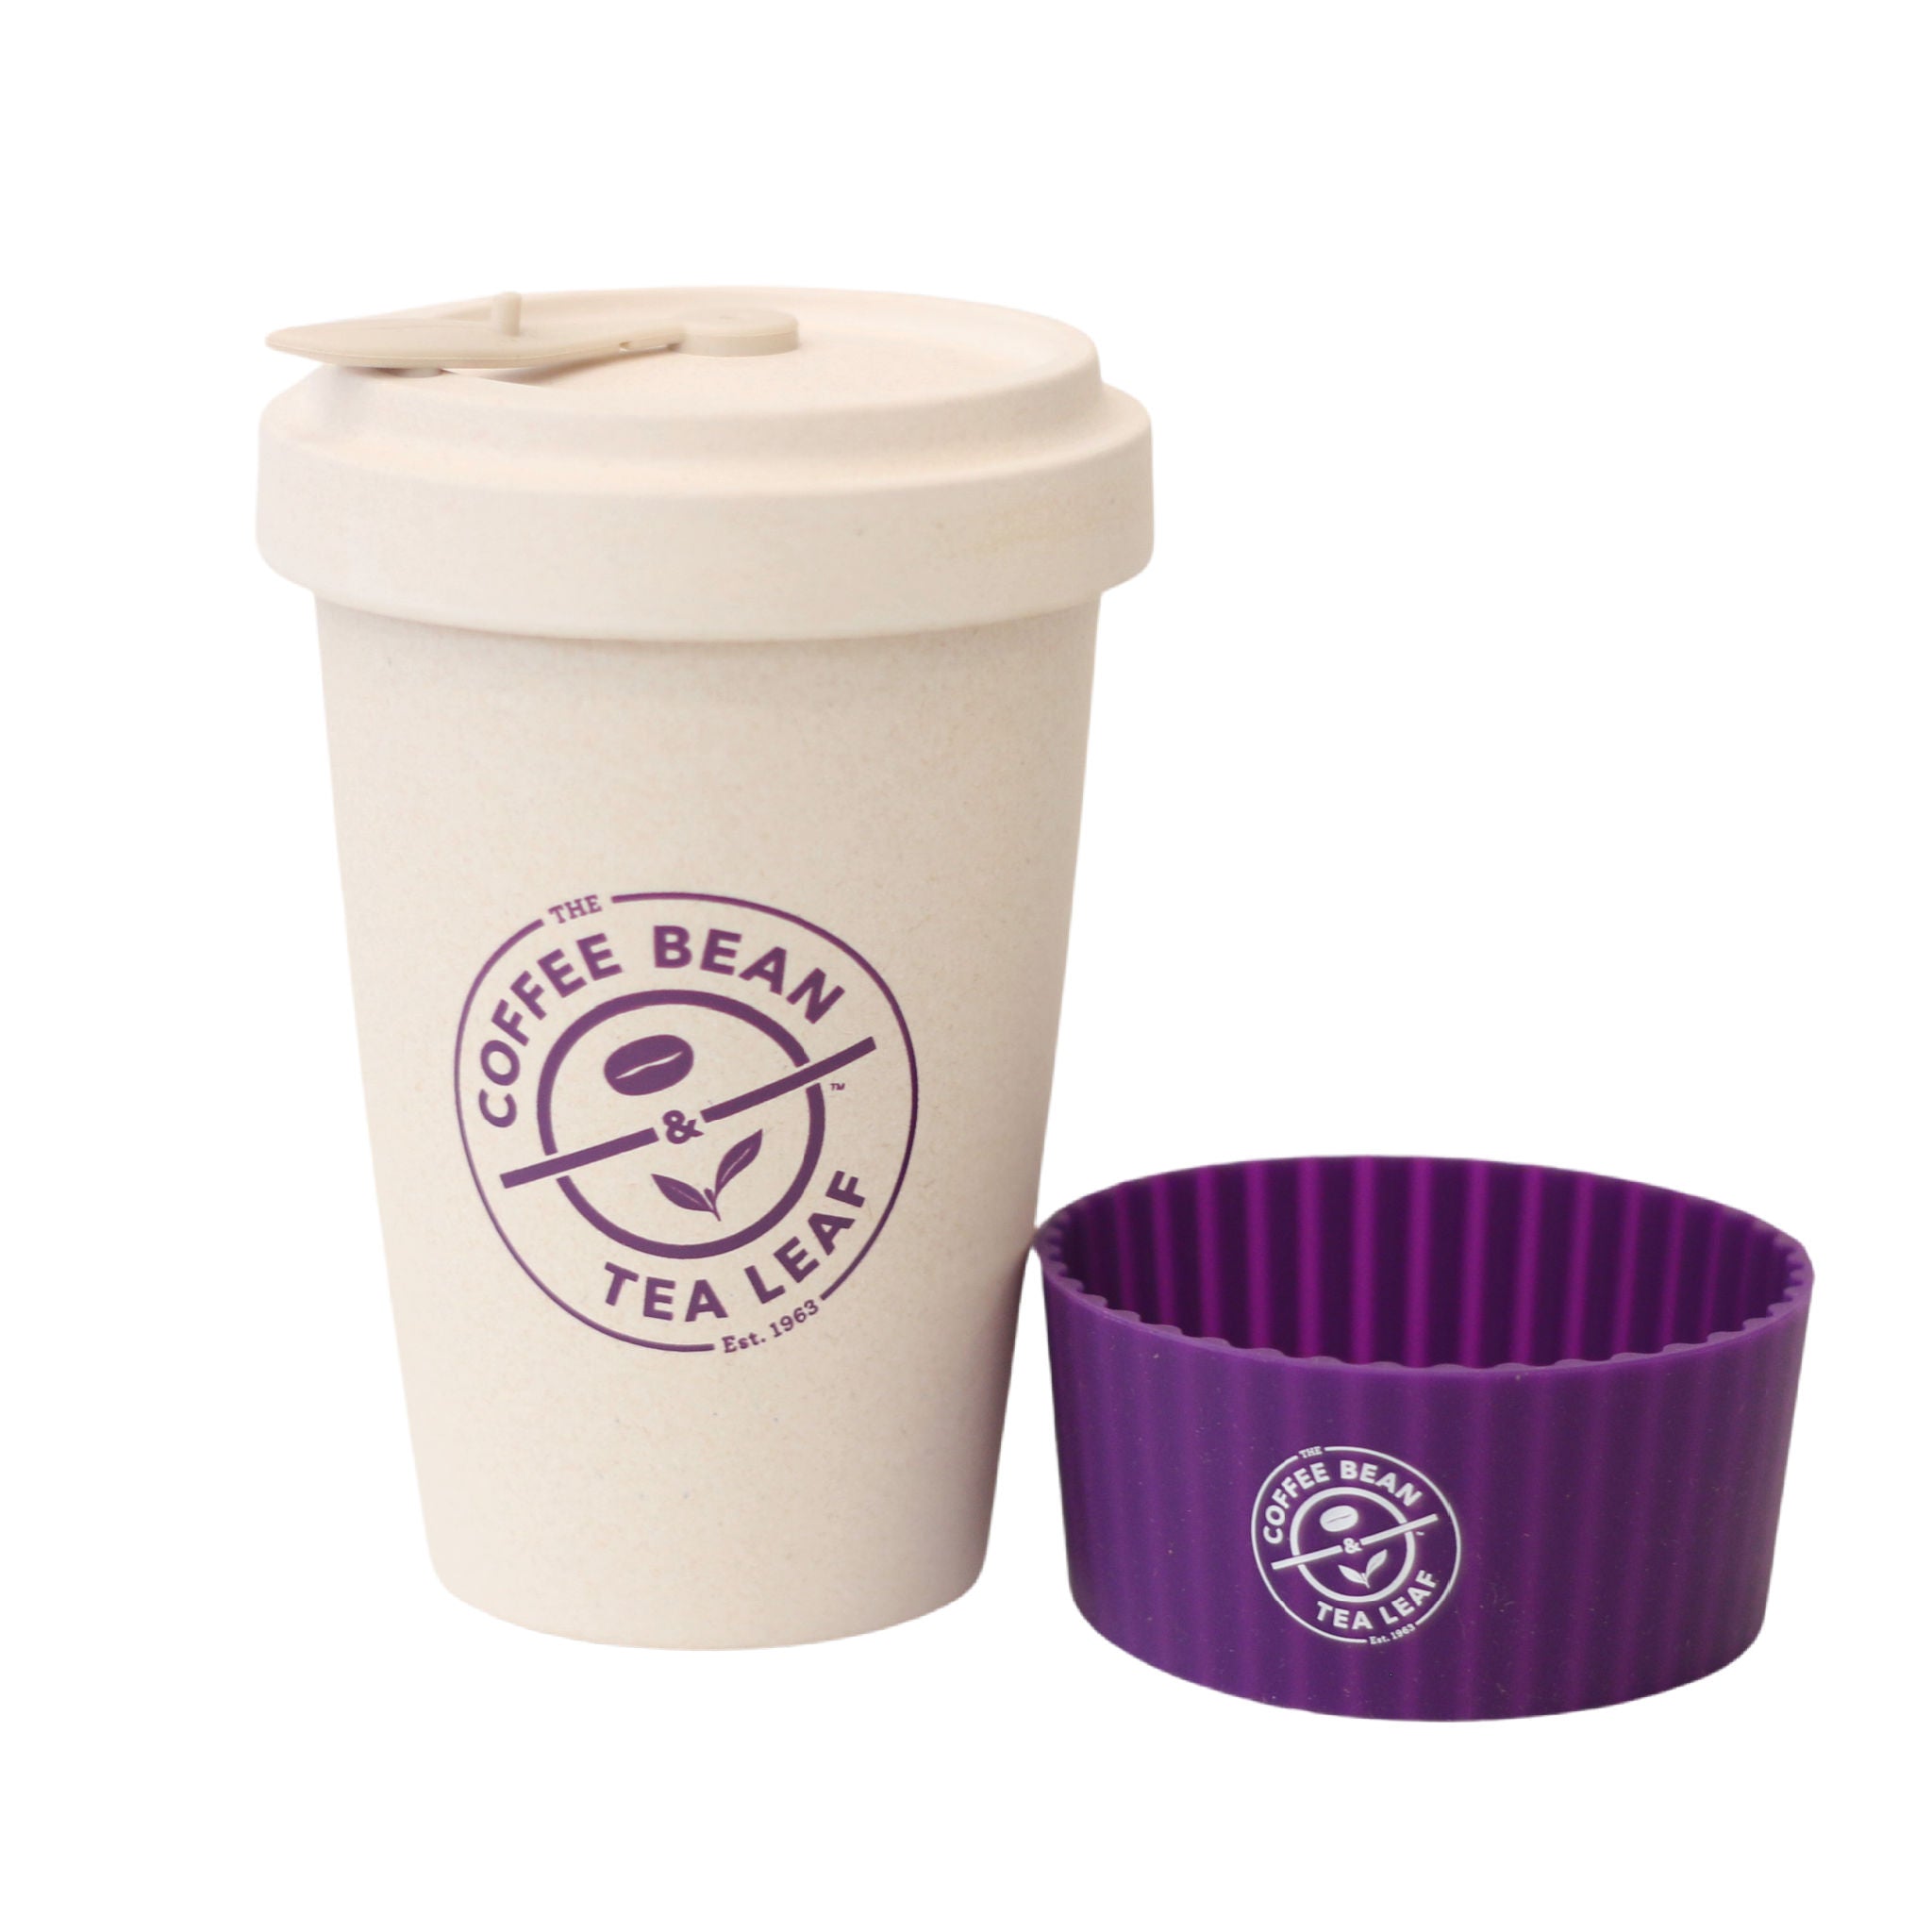 Reusable Coffee To Go Cup with Lid, 16oz Travel Cup, Made in USA, BPA-Free